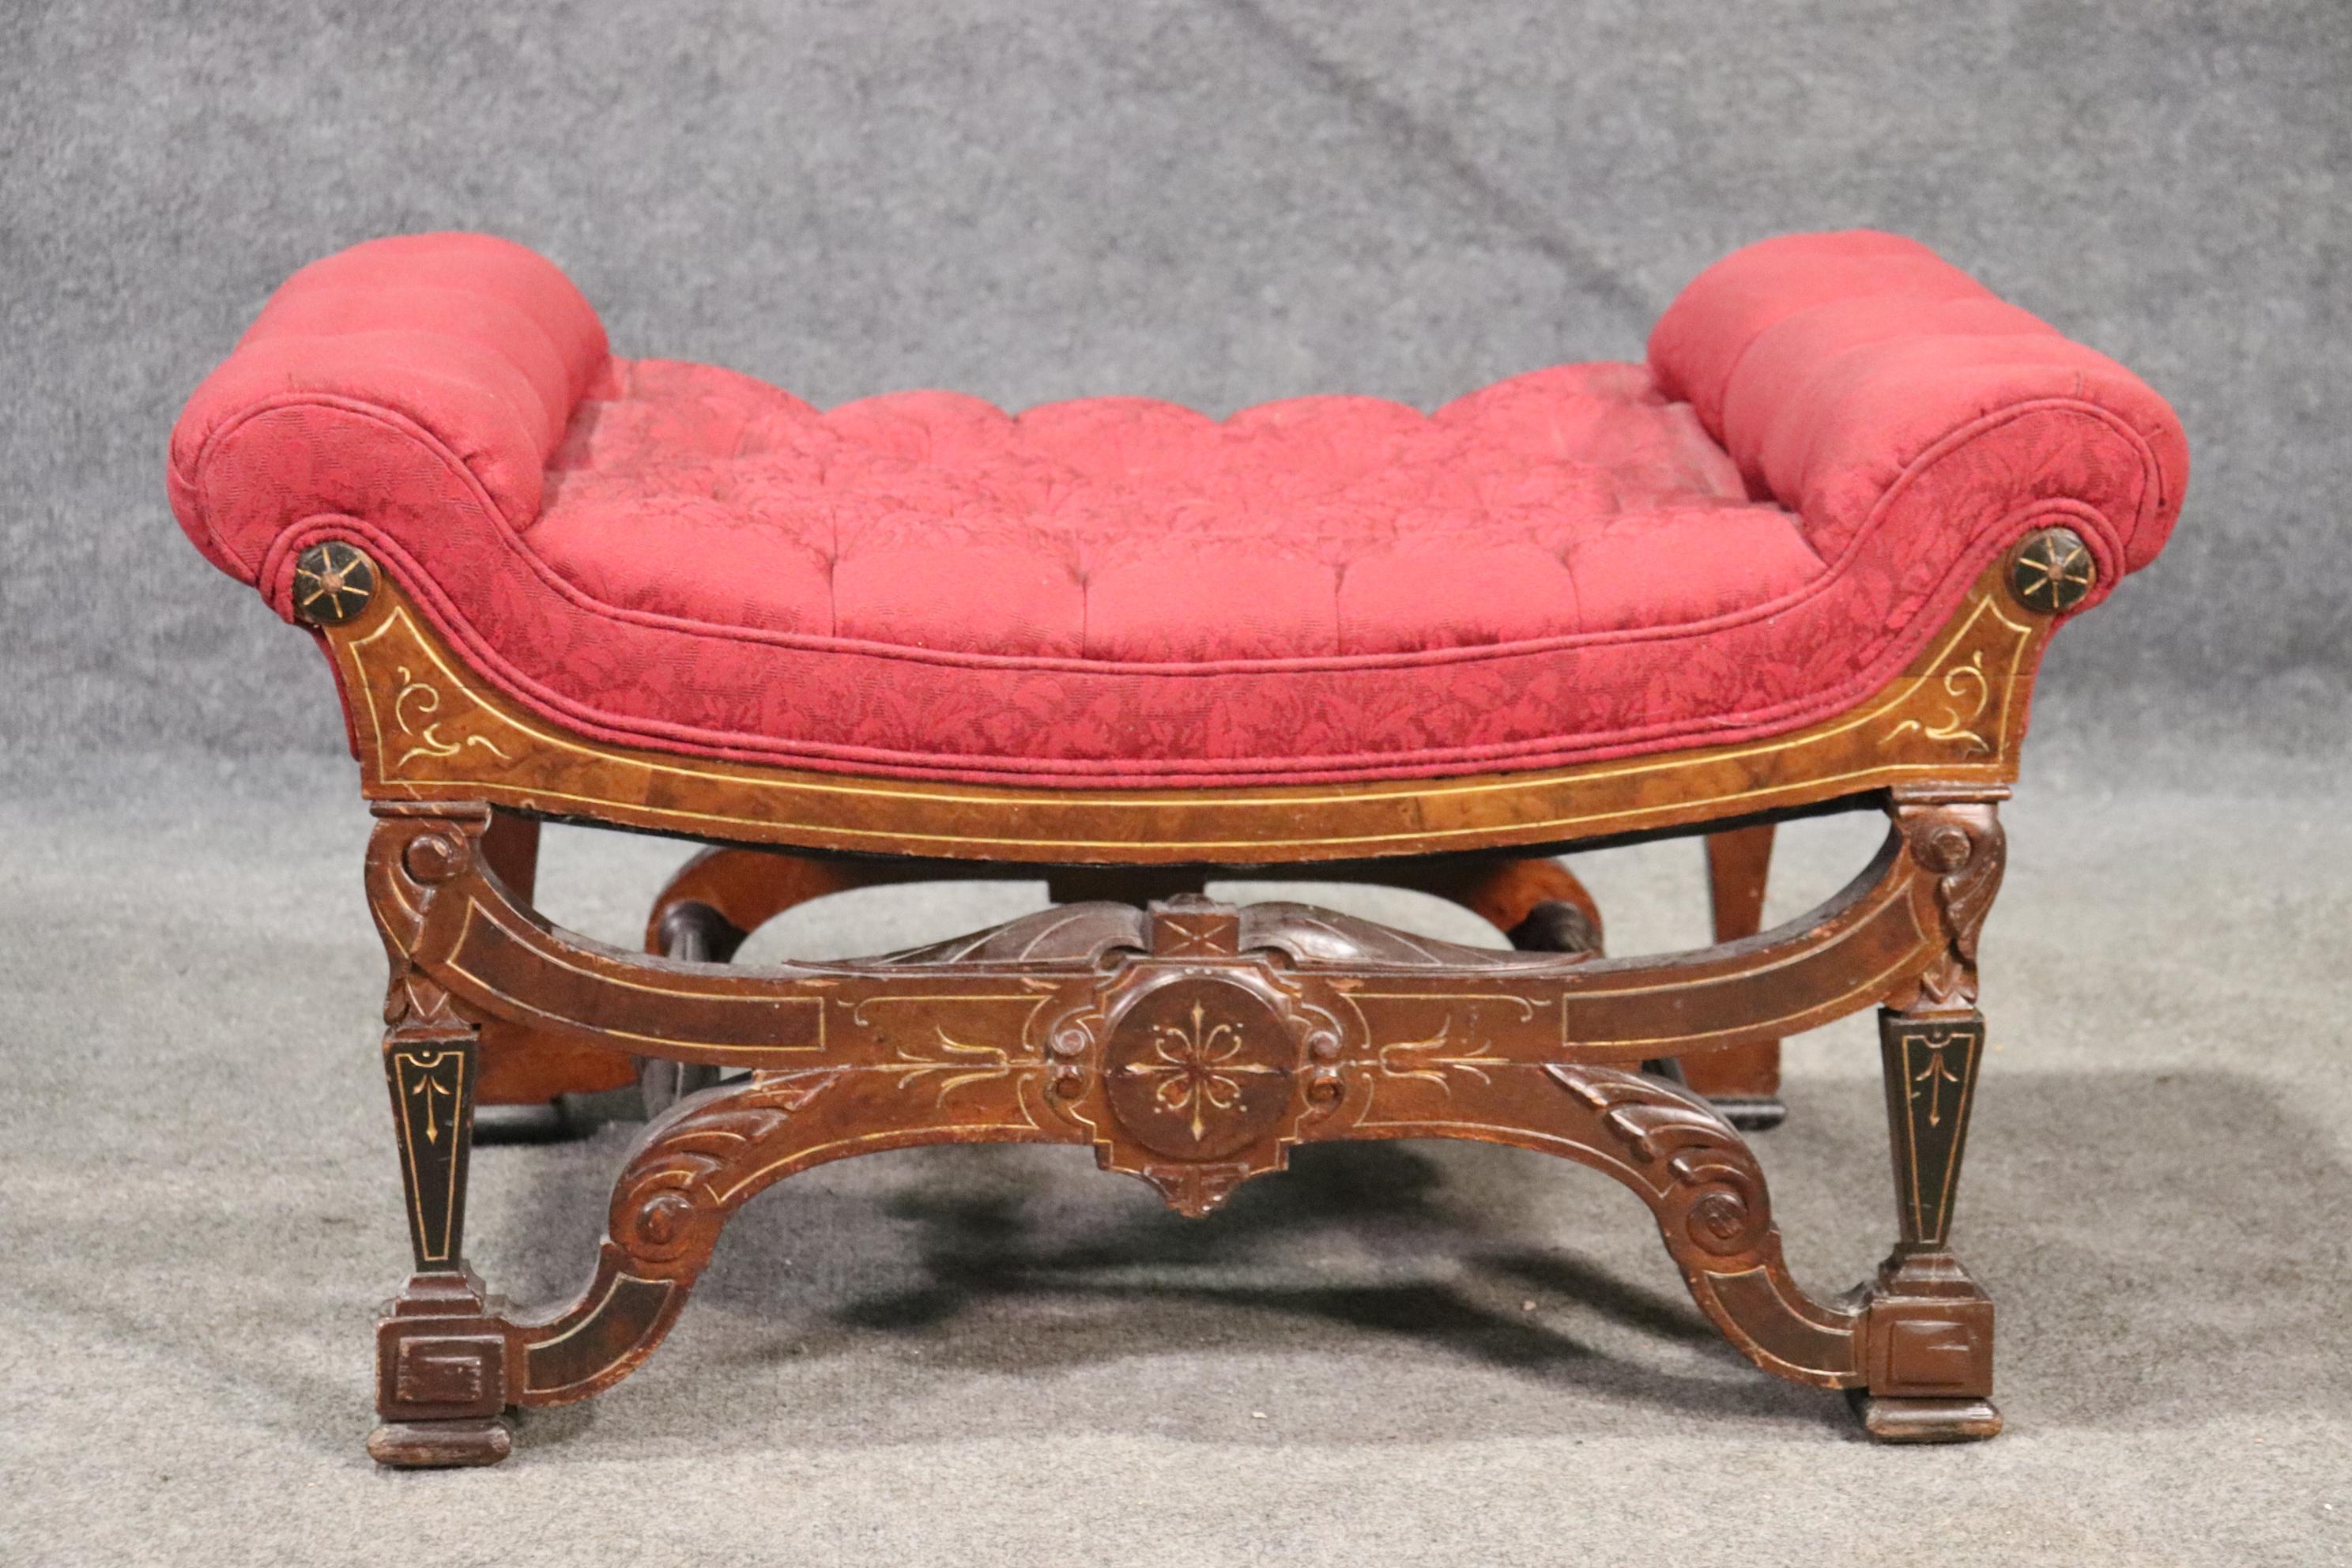 This is a gorgeous bench most likely made by Pottier & Stymus. The bench is in good condition for its age and has beautiful carved details. The bench measures 32 wide x 18 inches tall x 18 inches deep.